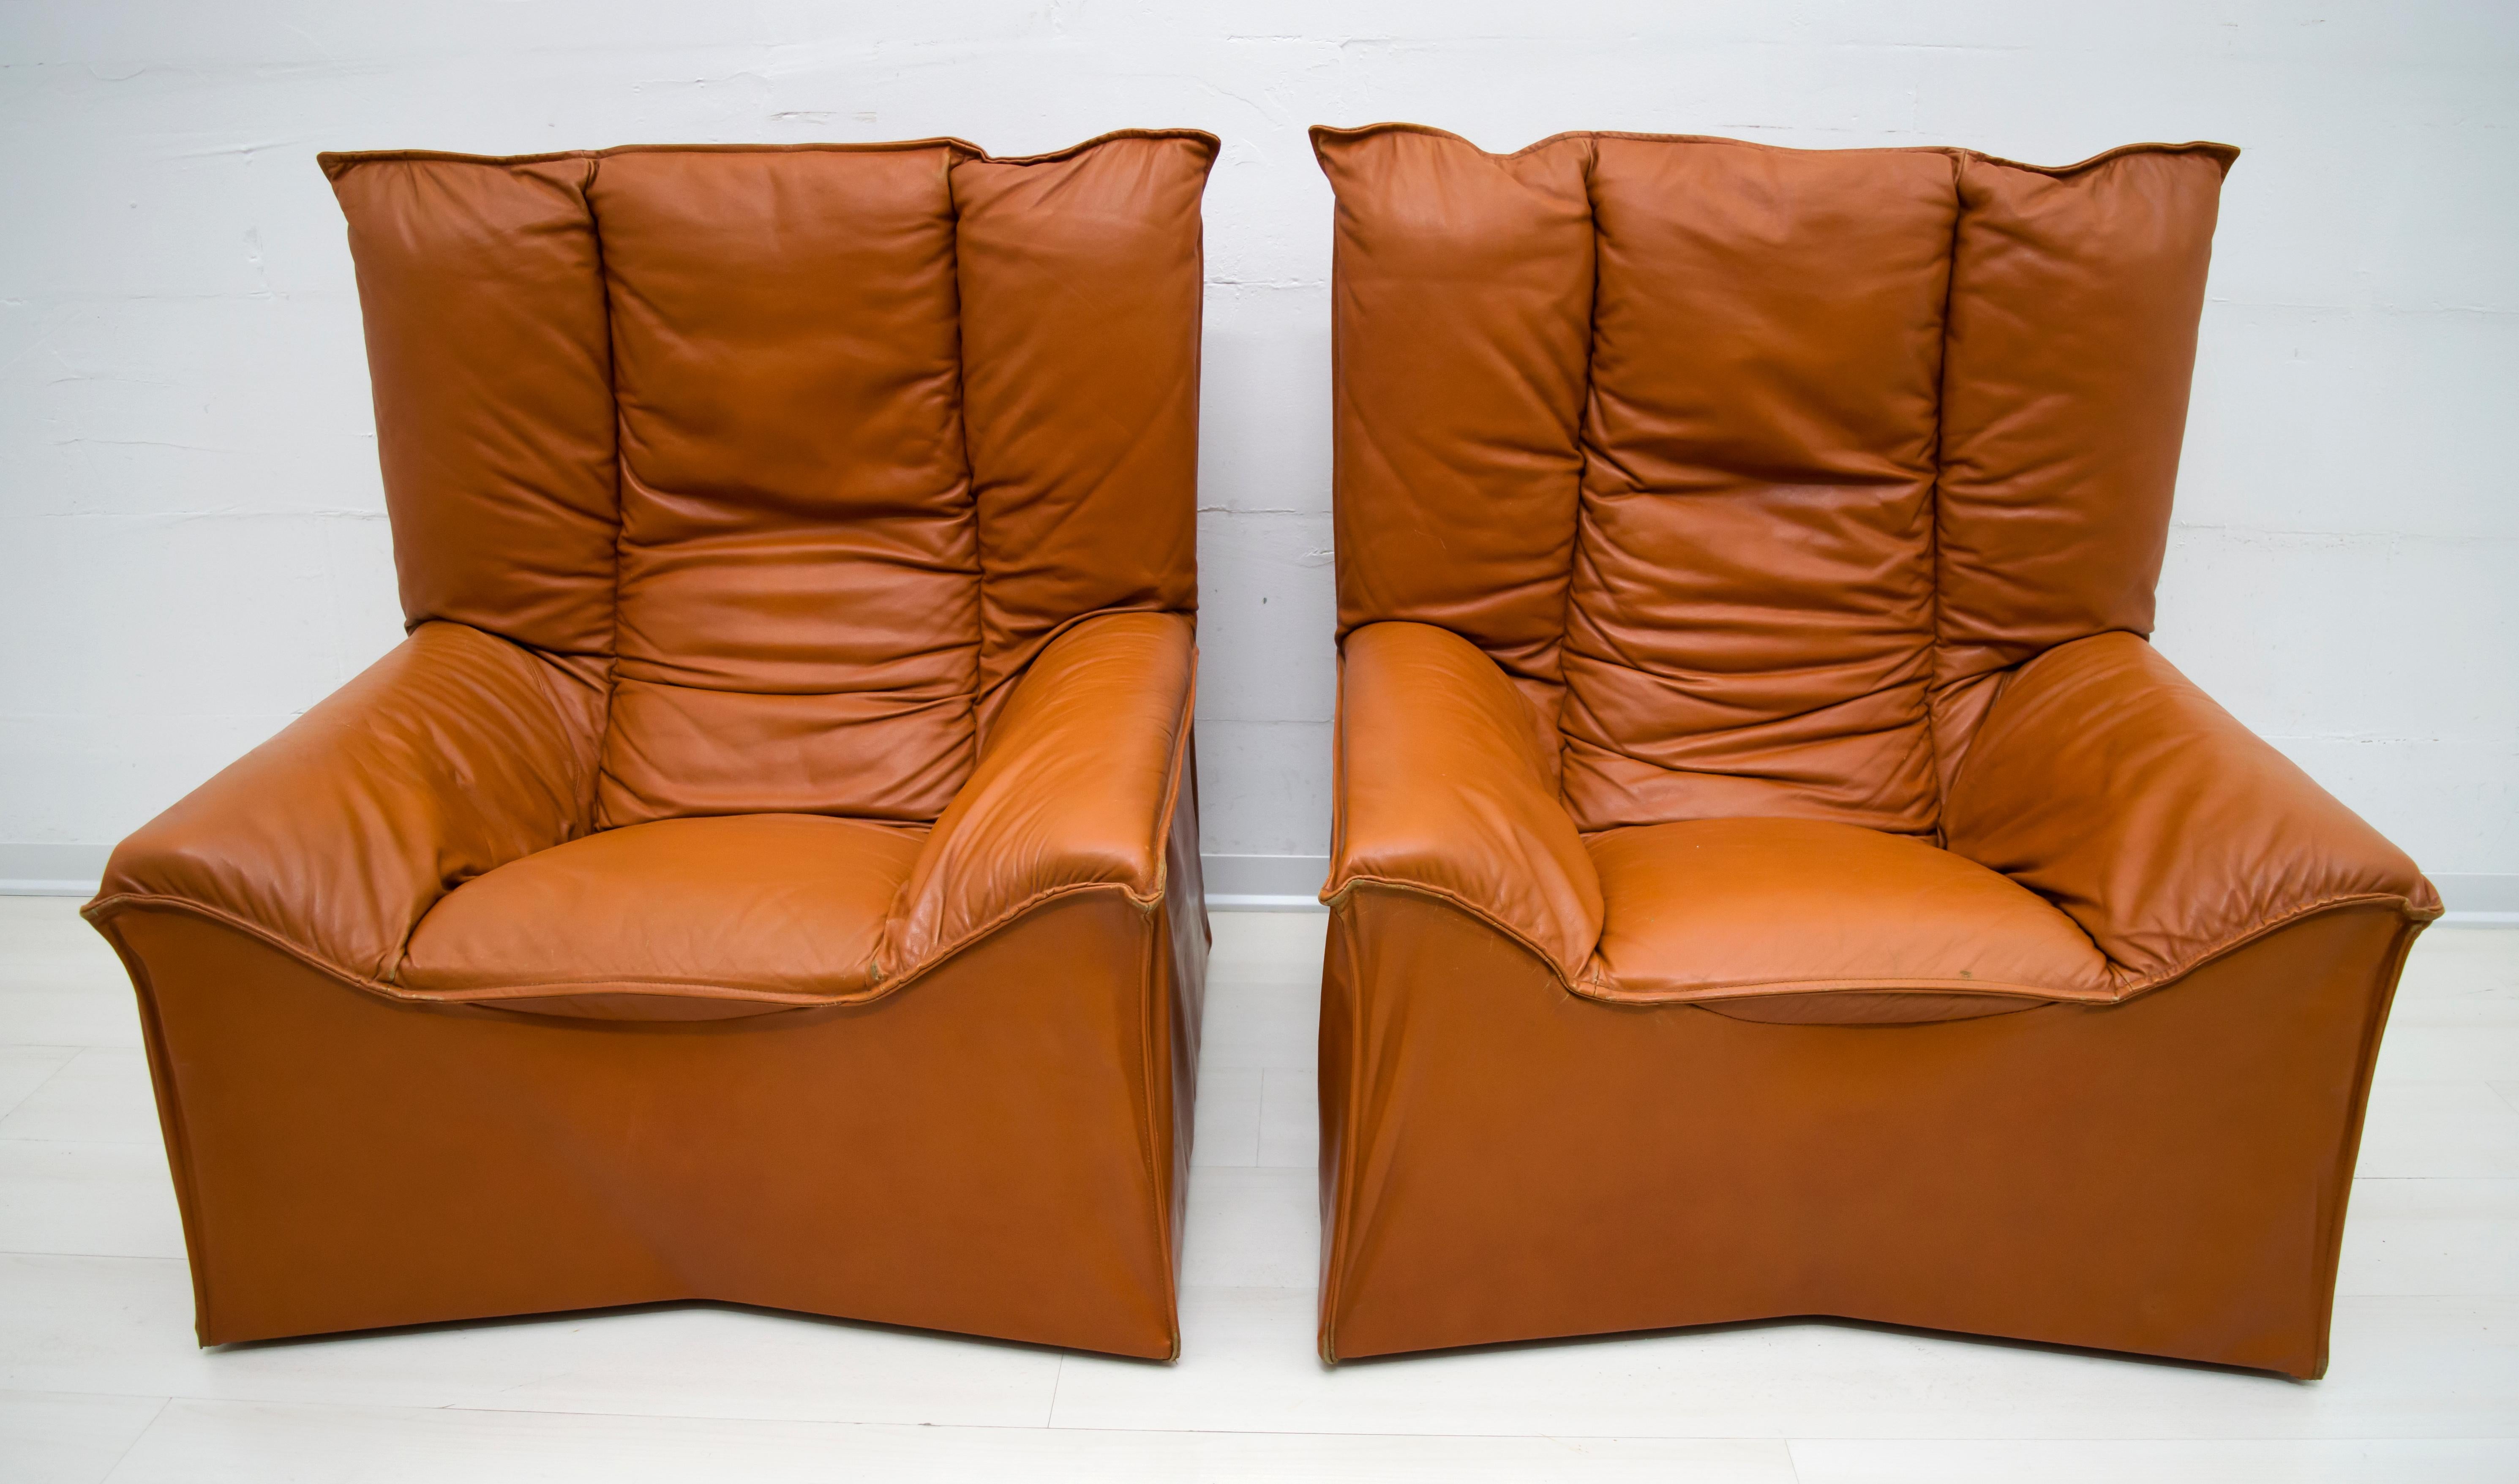 This pair of armchairs upholstered in genuine leather-colored leather were produced by the famous Italian company Cinova, in the 1960s.
Cinova made use of the collaboration of great designs such as: Carlo de Carli, Tito Agnoli, Menilio Taro, Sergio